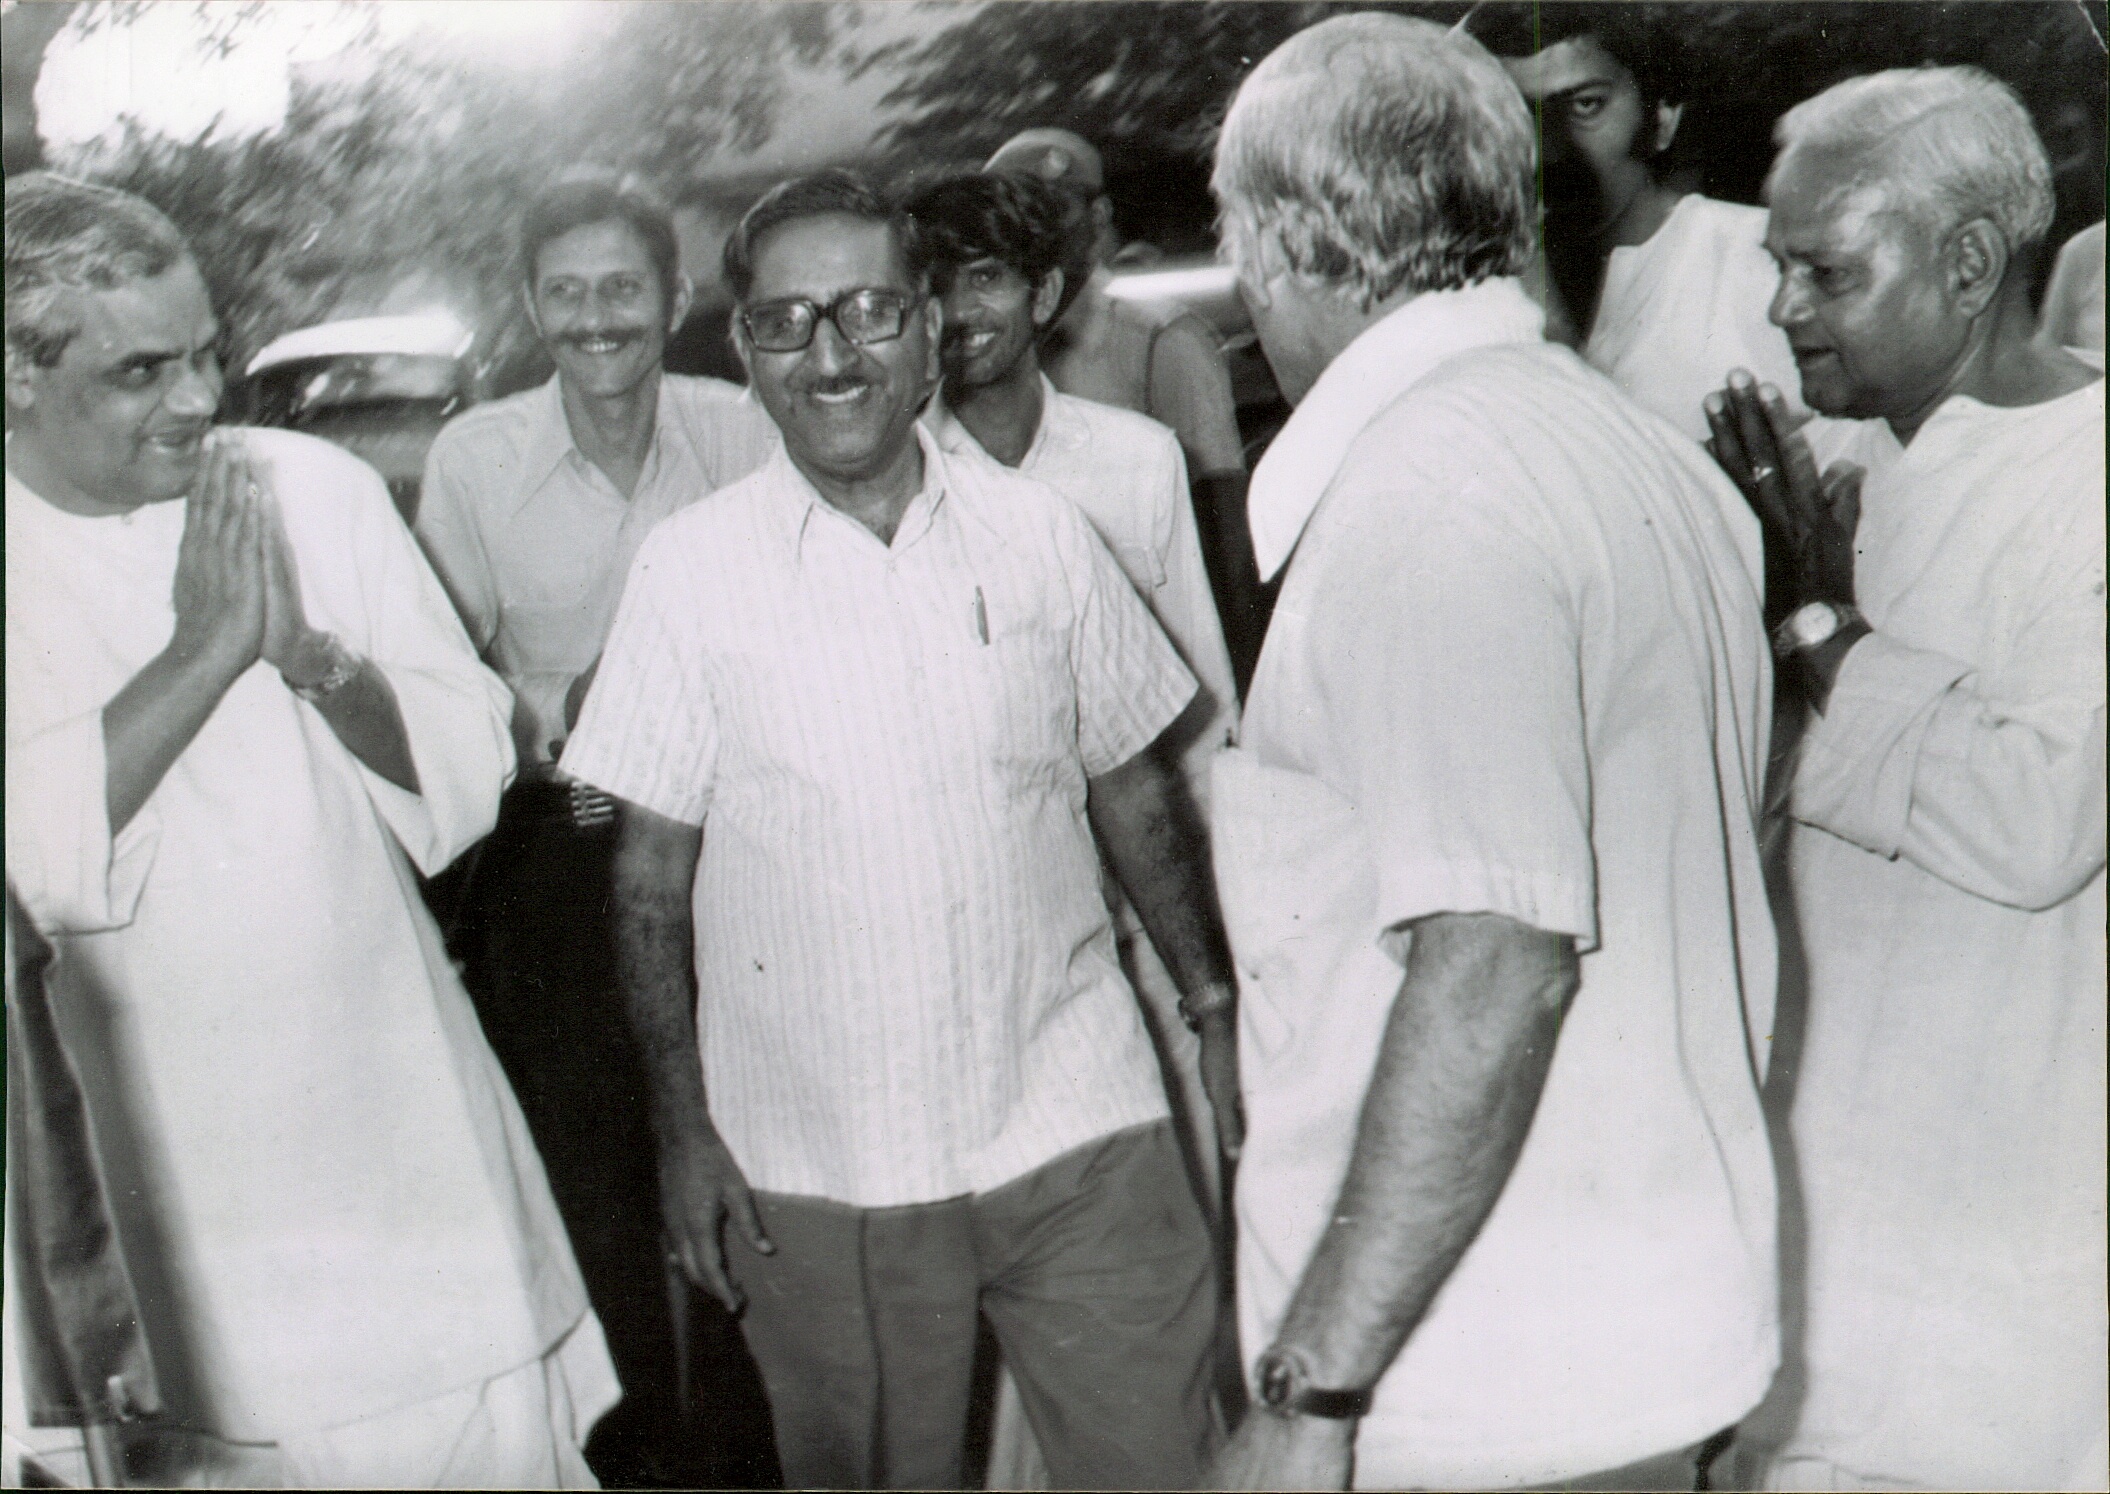 Ex Indian Prime Minister Atal Behari Vajpayee honoring my Great-Grand Father in New Delhi